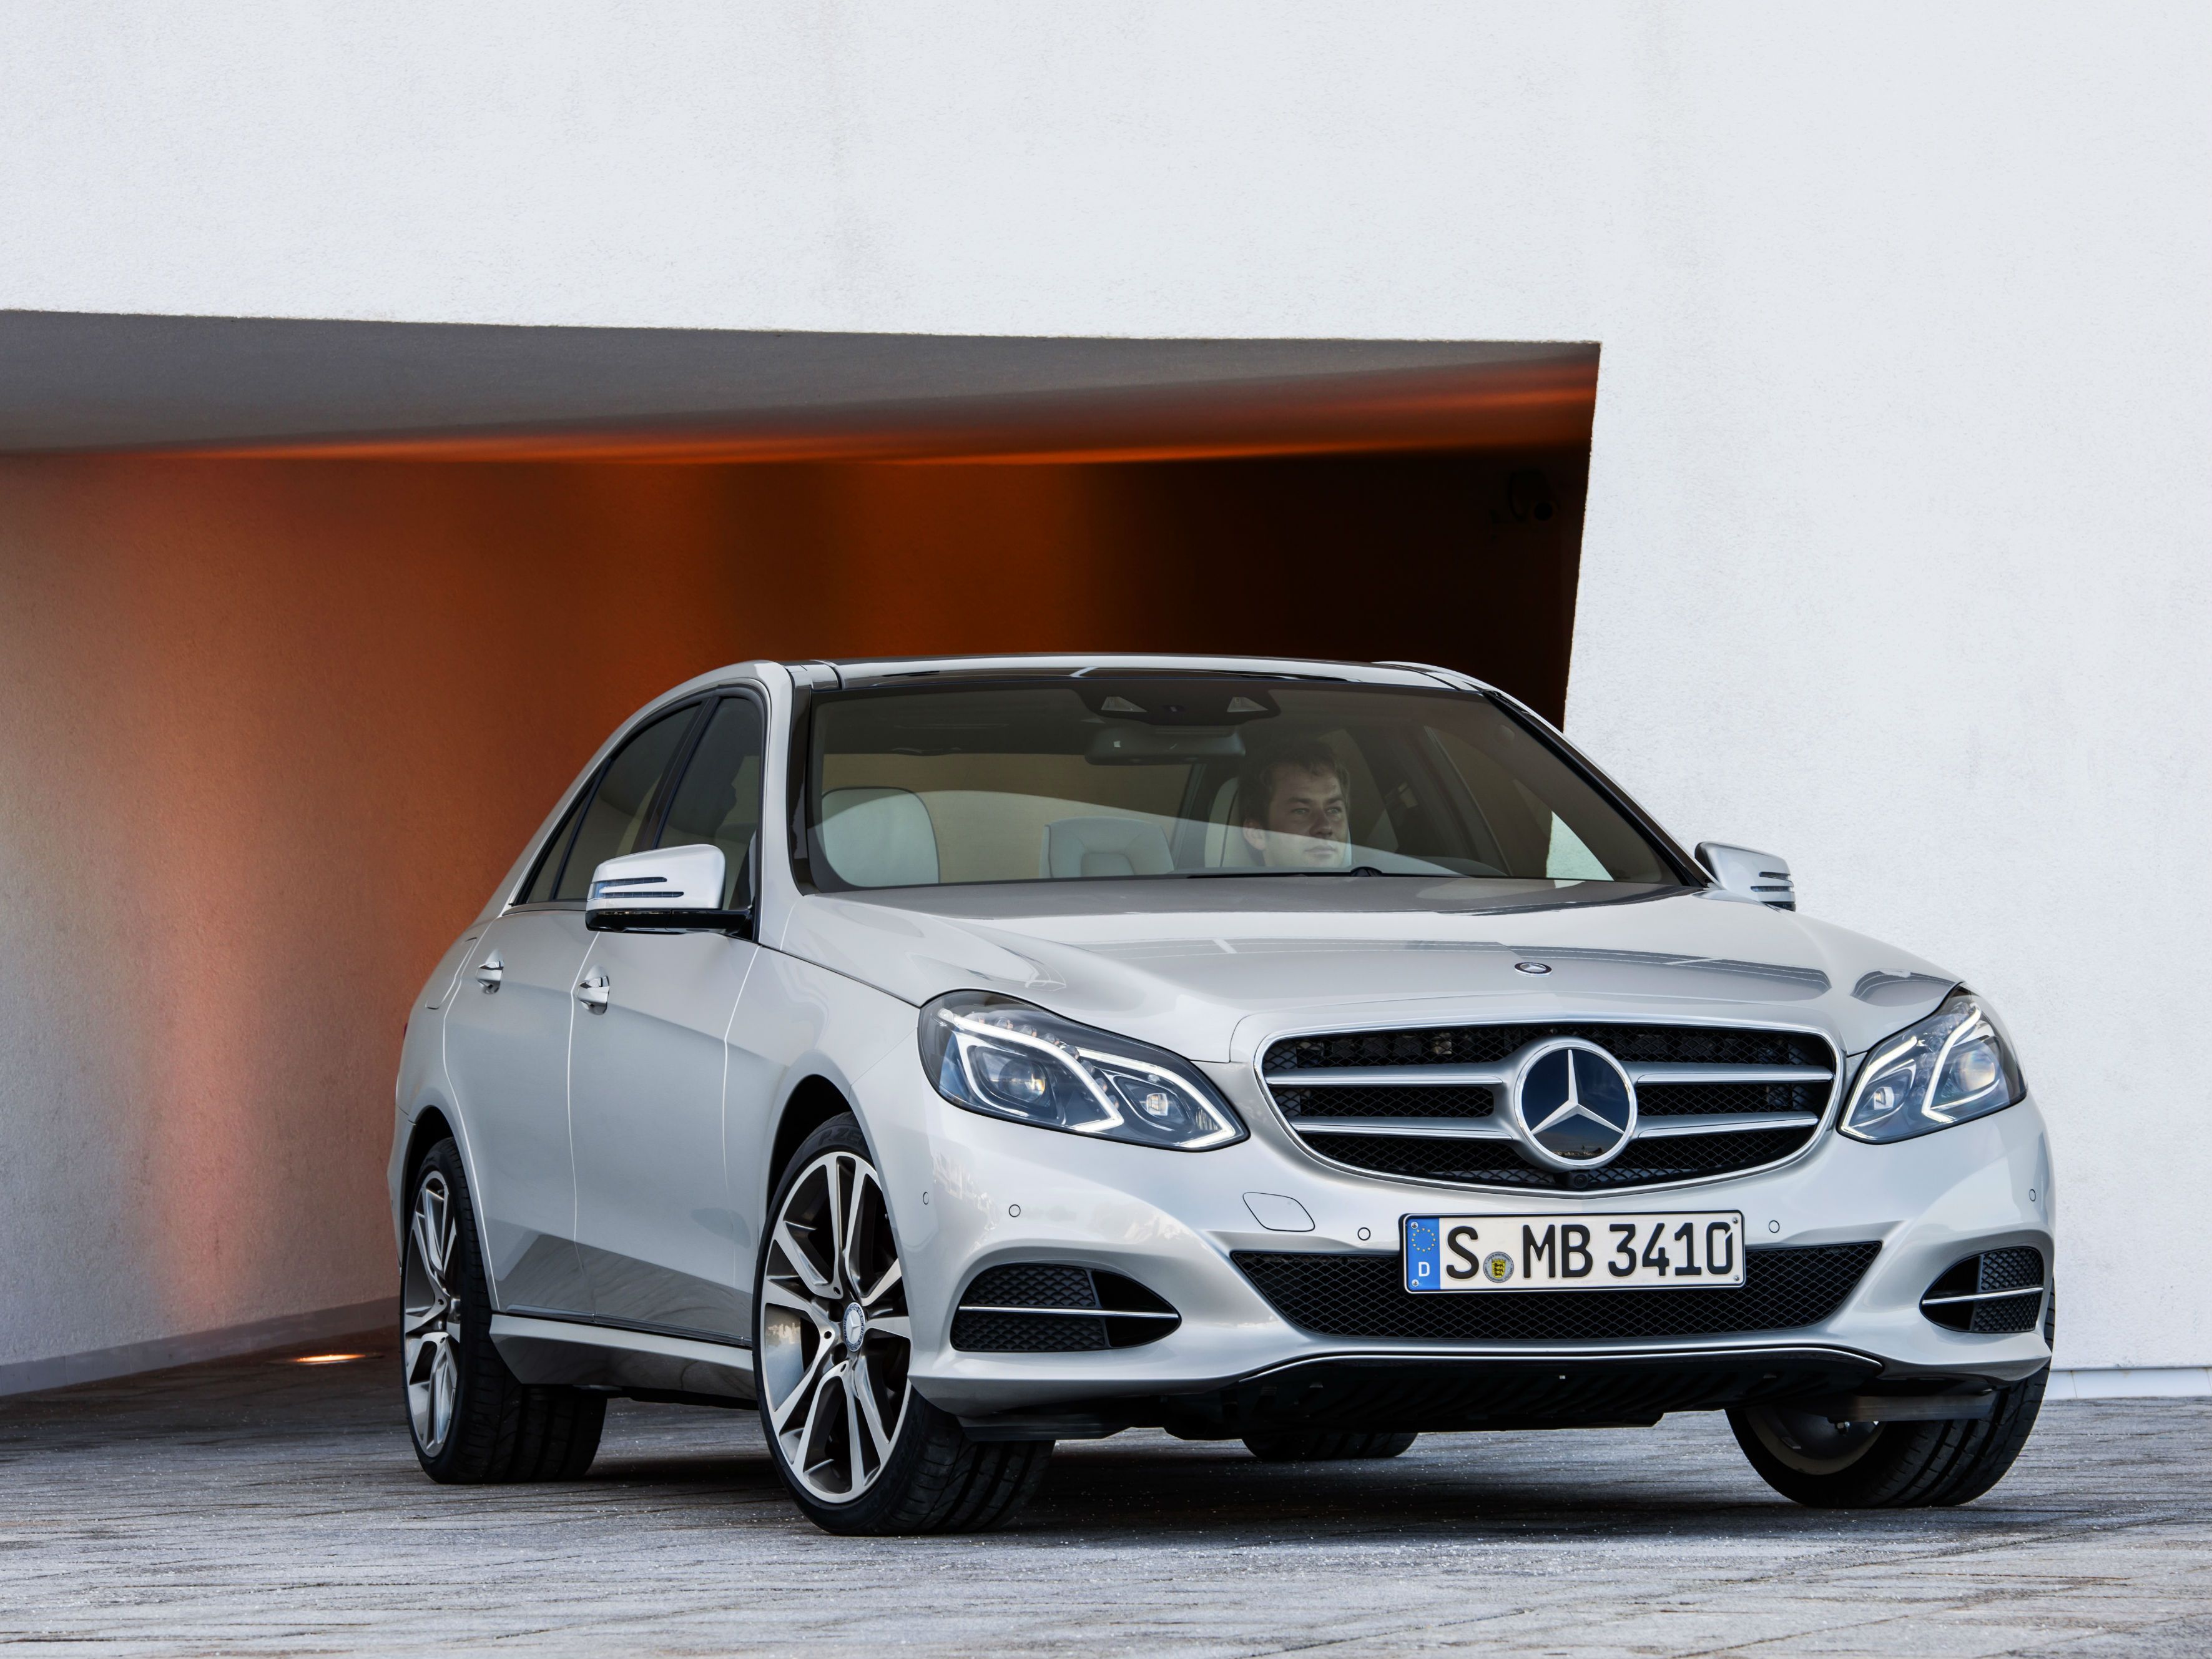 Mercedes-Benz E-Class facelift to be launched in India - ZigWheels